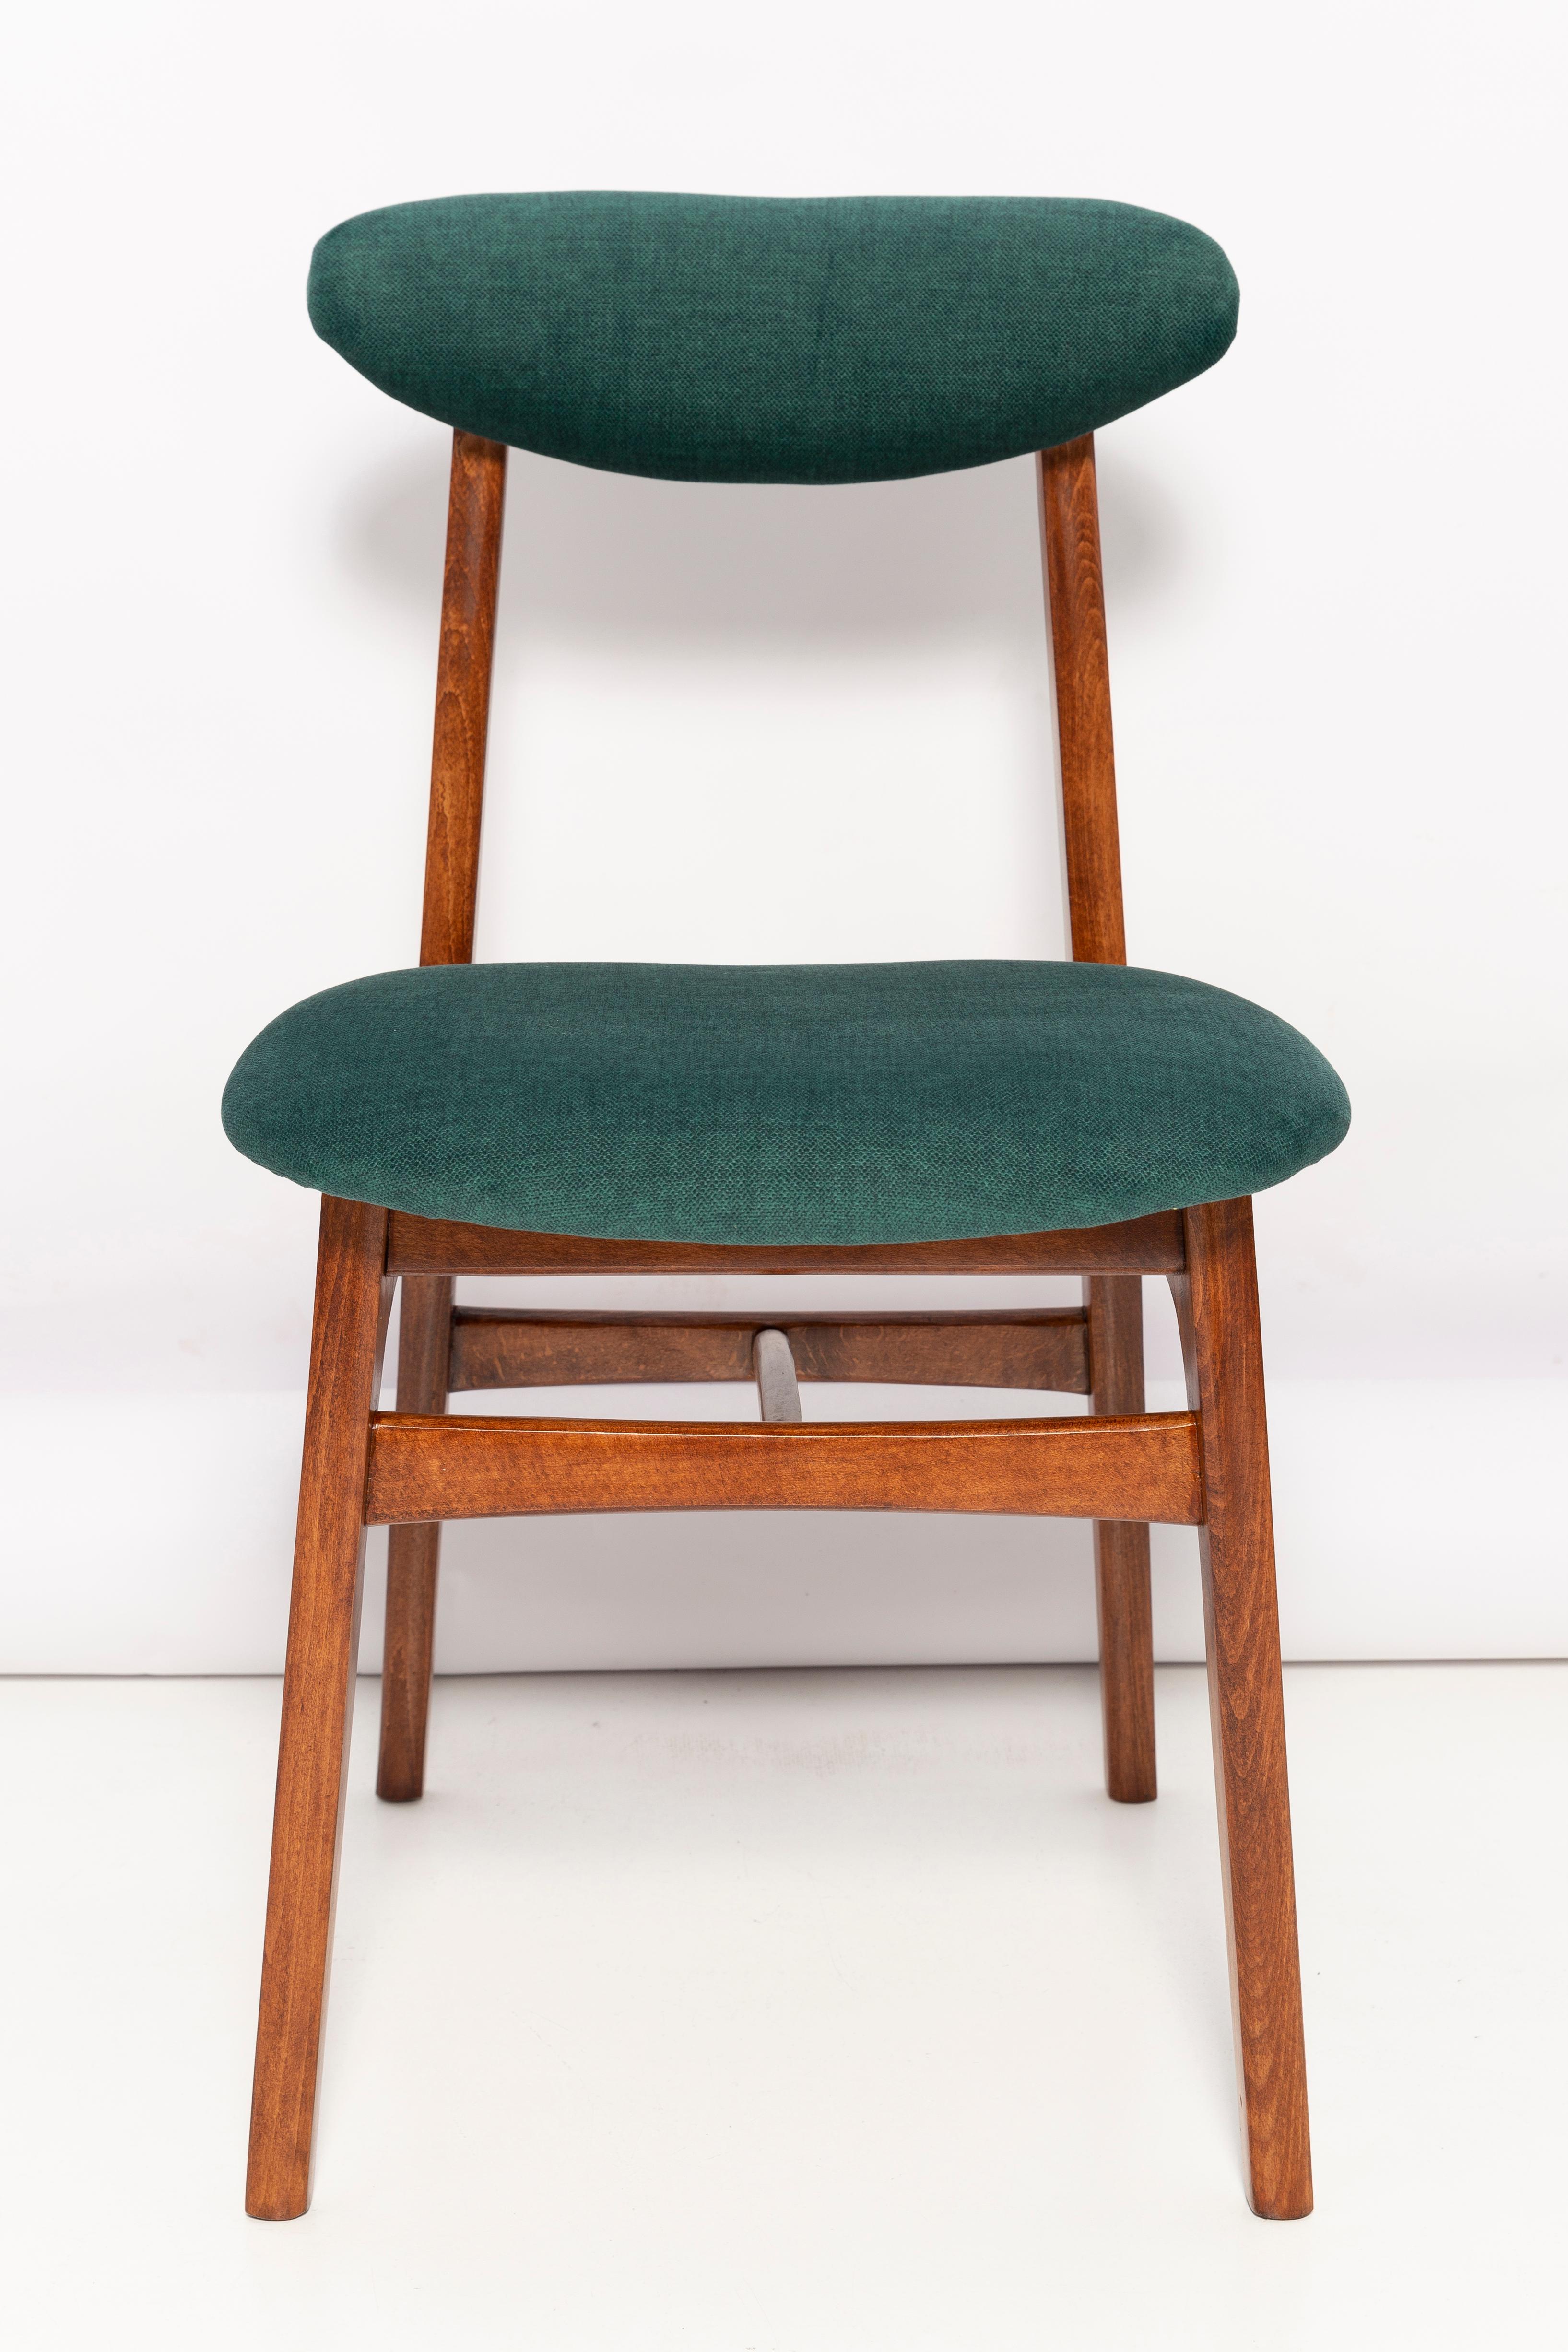 Light form nice vintage chair designed by Prof. Rajmund Halas. It has been made of beechwood. Designed and produced in Poland. Chair is after undergone a complete upholstery renovation, the woodwork has been refreshed. Seats and backs were dressed